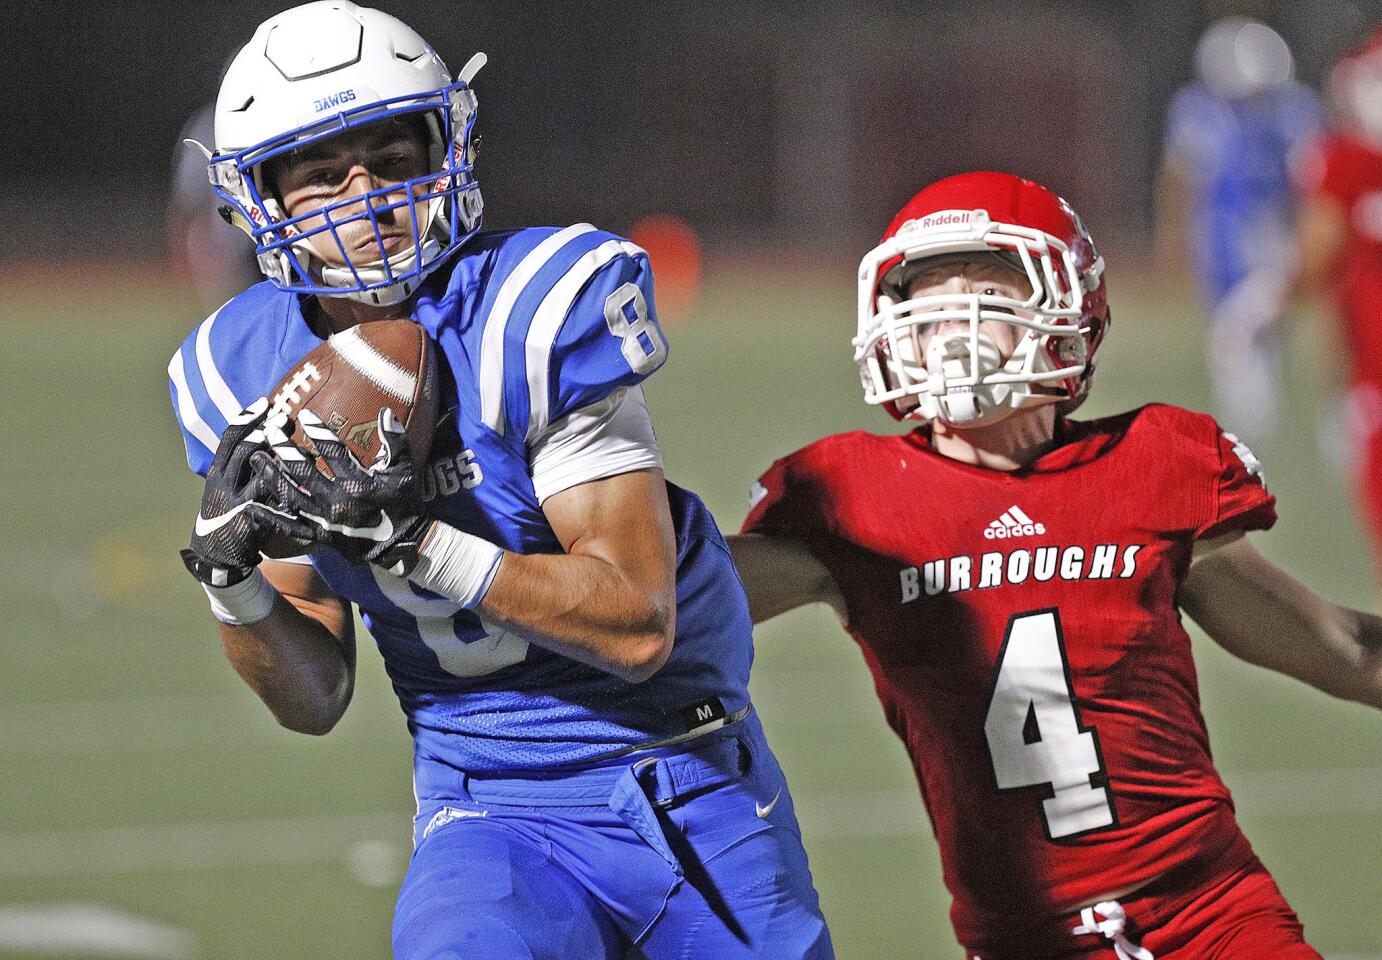 Burbank's Erik Harutyunyan makes a big catch as the ball drops in over his shoulder against Burroughs' Nathan Turner in a big-game rival Pacific League football game at Memorial Field in Burbank on Friday, October 26, 2018.